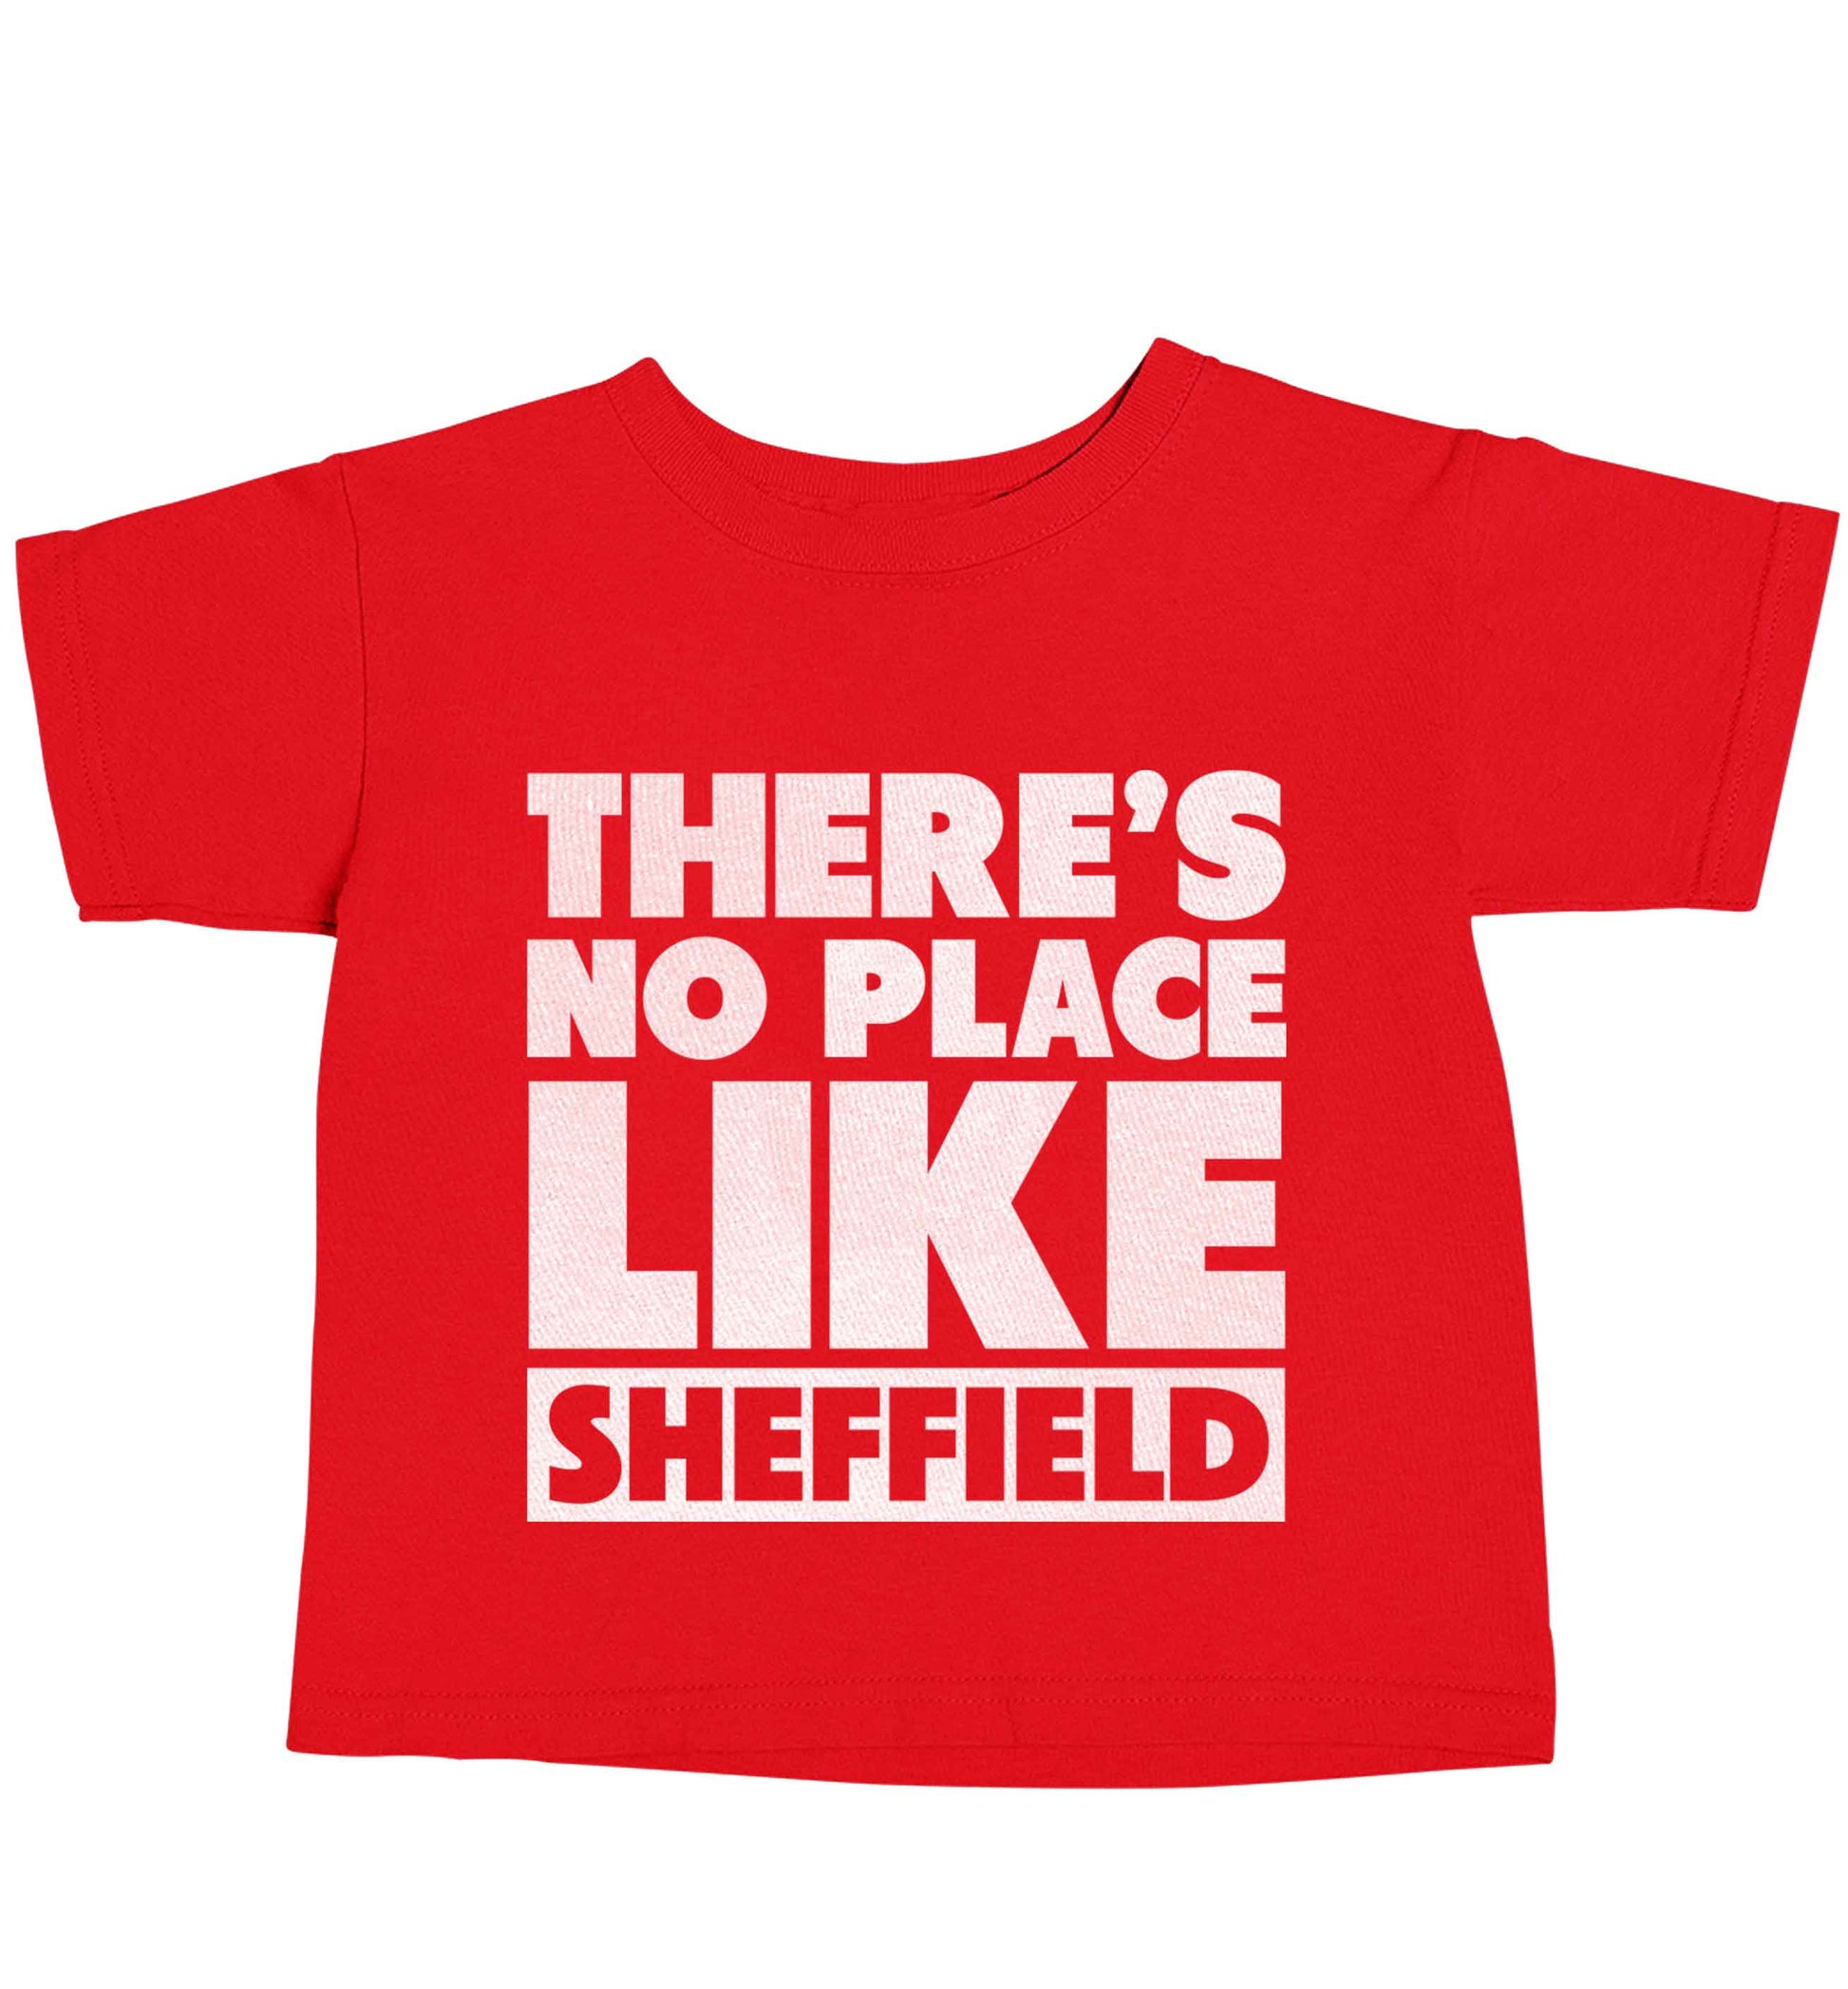 There's no place like Sheffield red baby toddler Tshirt 2 Years